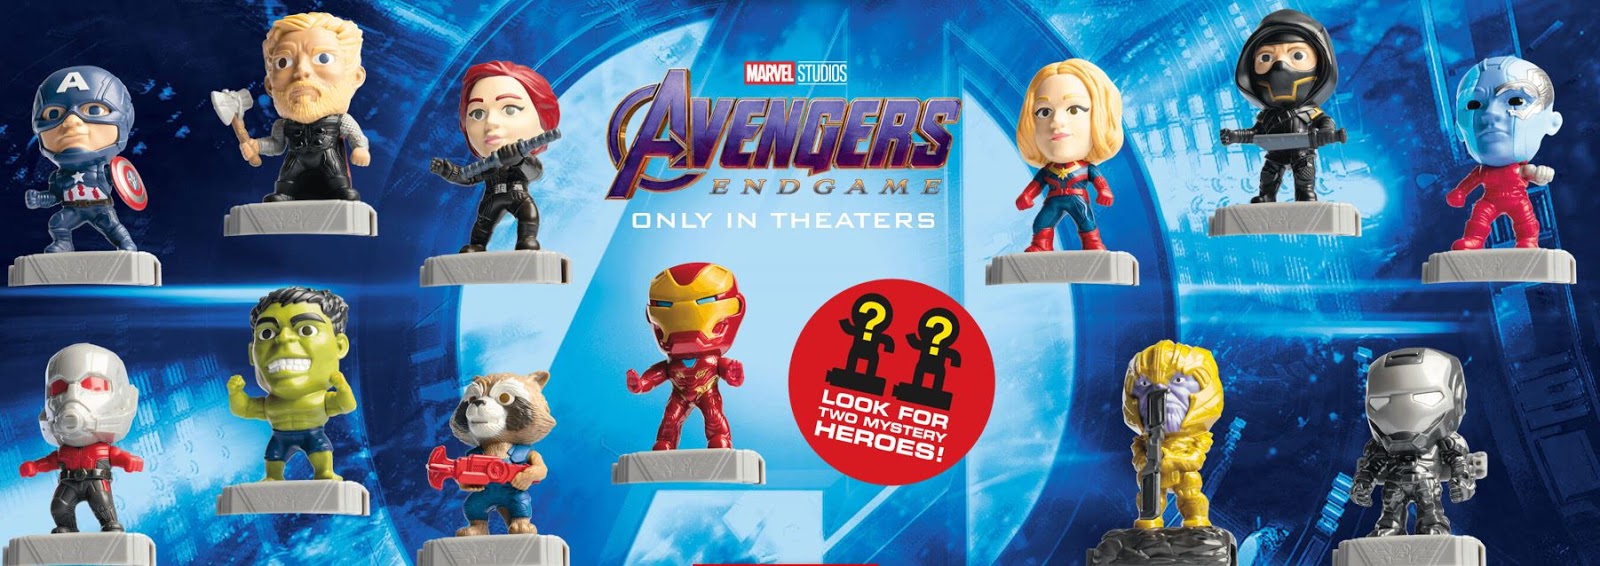 2019 Avengers End Game McDonalds Happy Meal toy Choose Character Free ship 